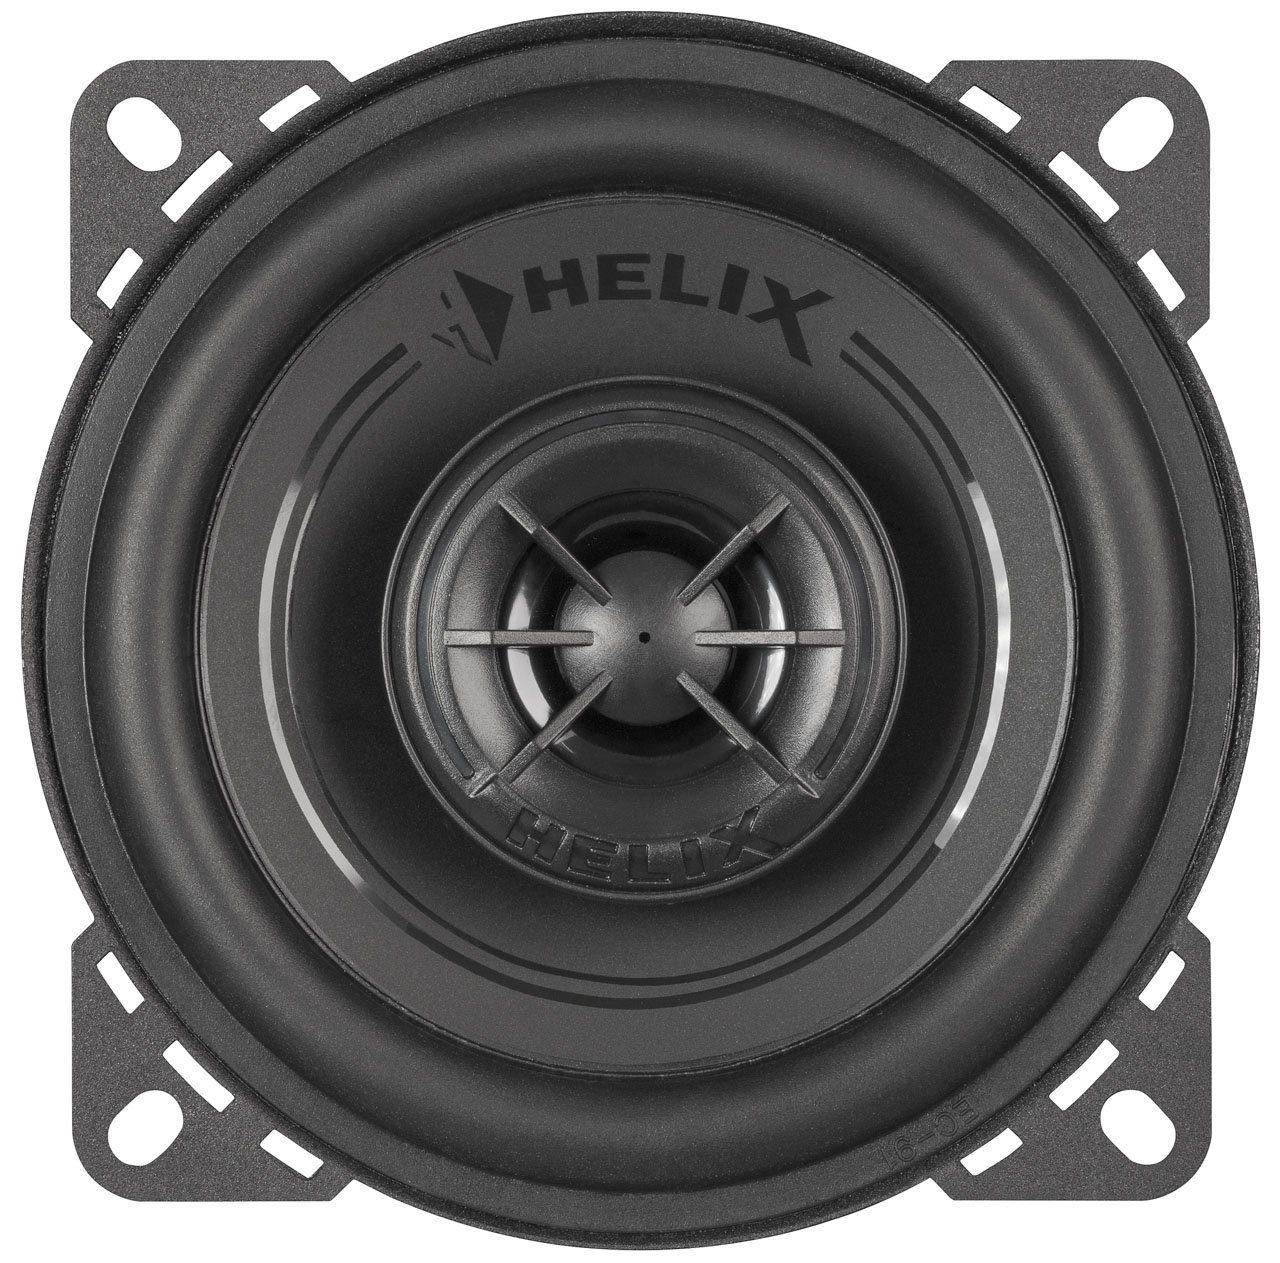 HELIX_F-4X-Front_1280x1263px_15-04-20.jpg